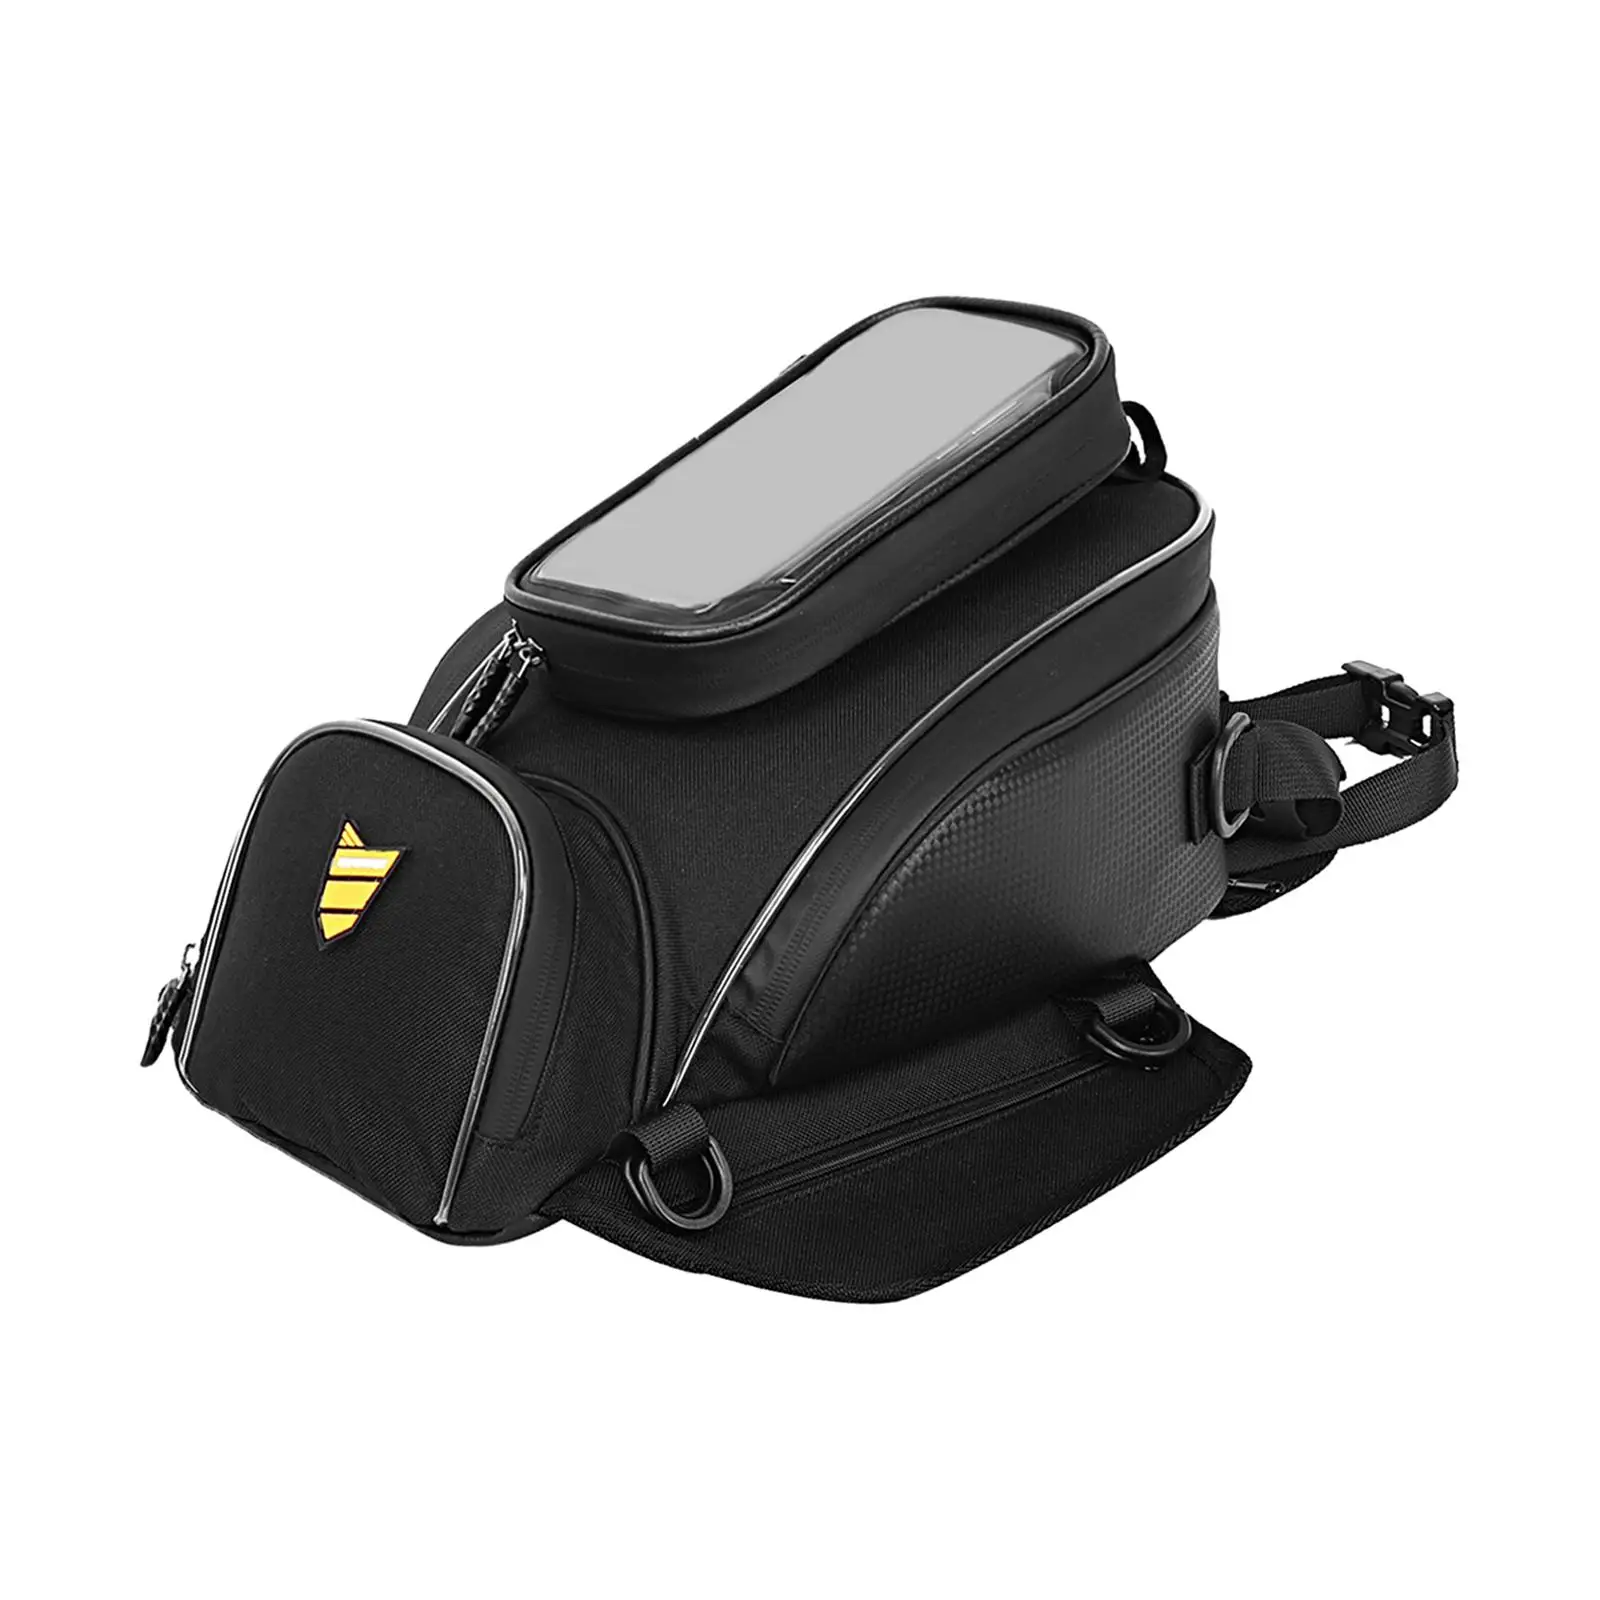 Motorcycle Phone Navigation Tank Storage Bag Phone Pocket Touch Screen Accessories for Outdoor Sports Riding Practical Durable